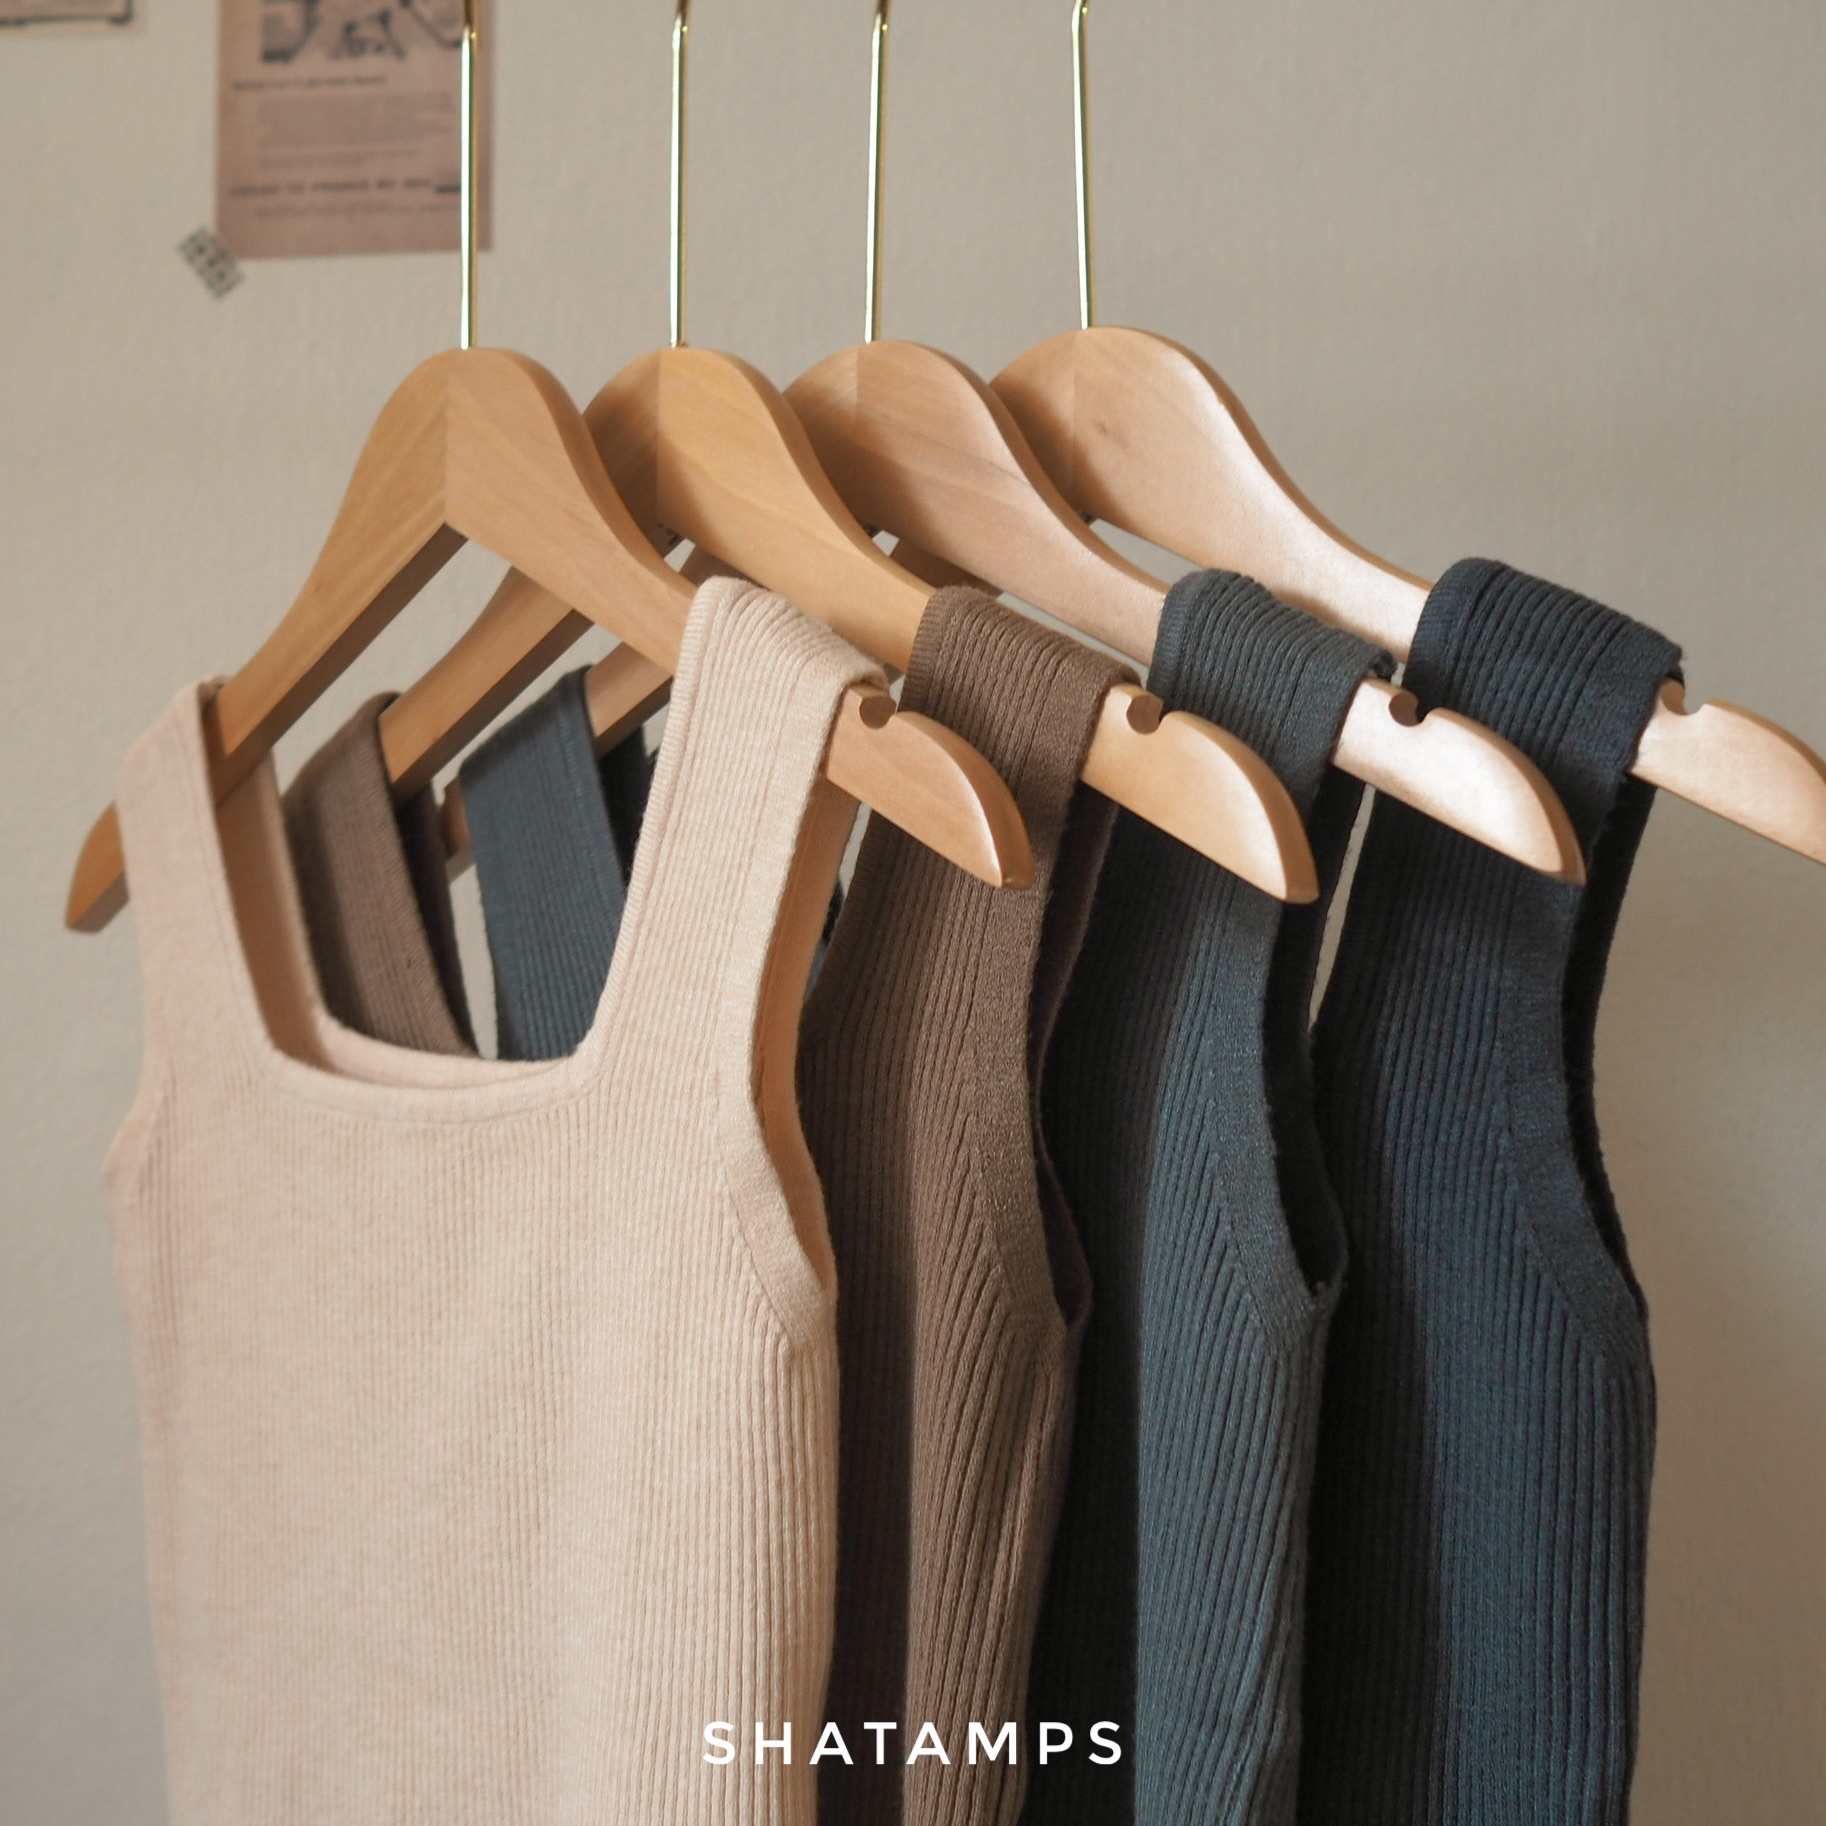 Shatamps - Square Knit Top (Brown, Grey, Cream, Navy)